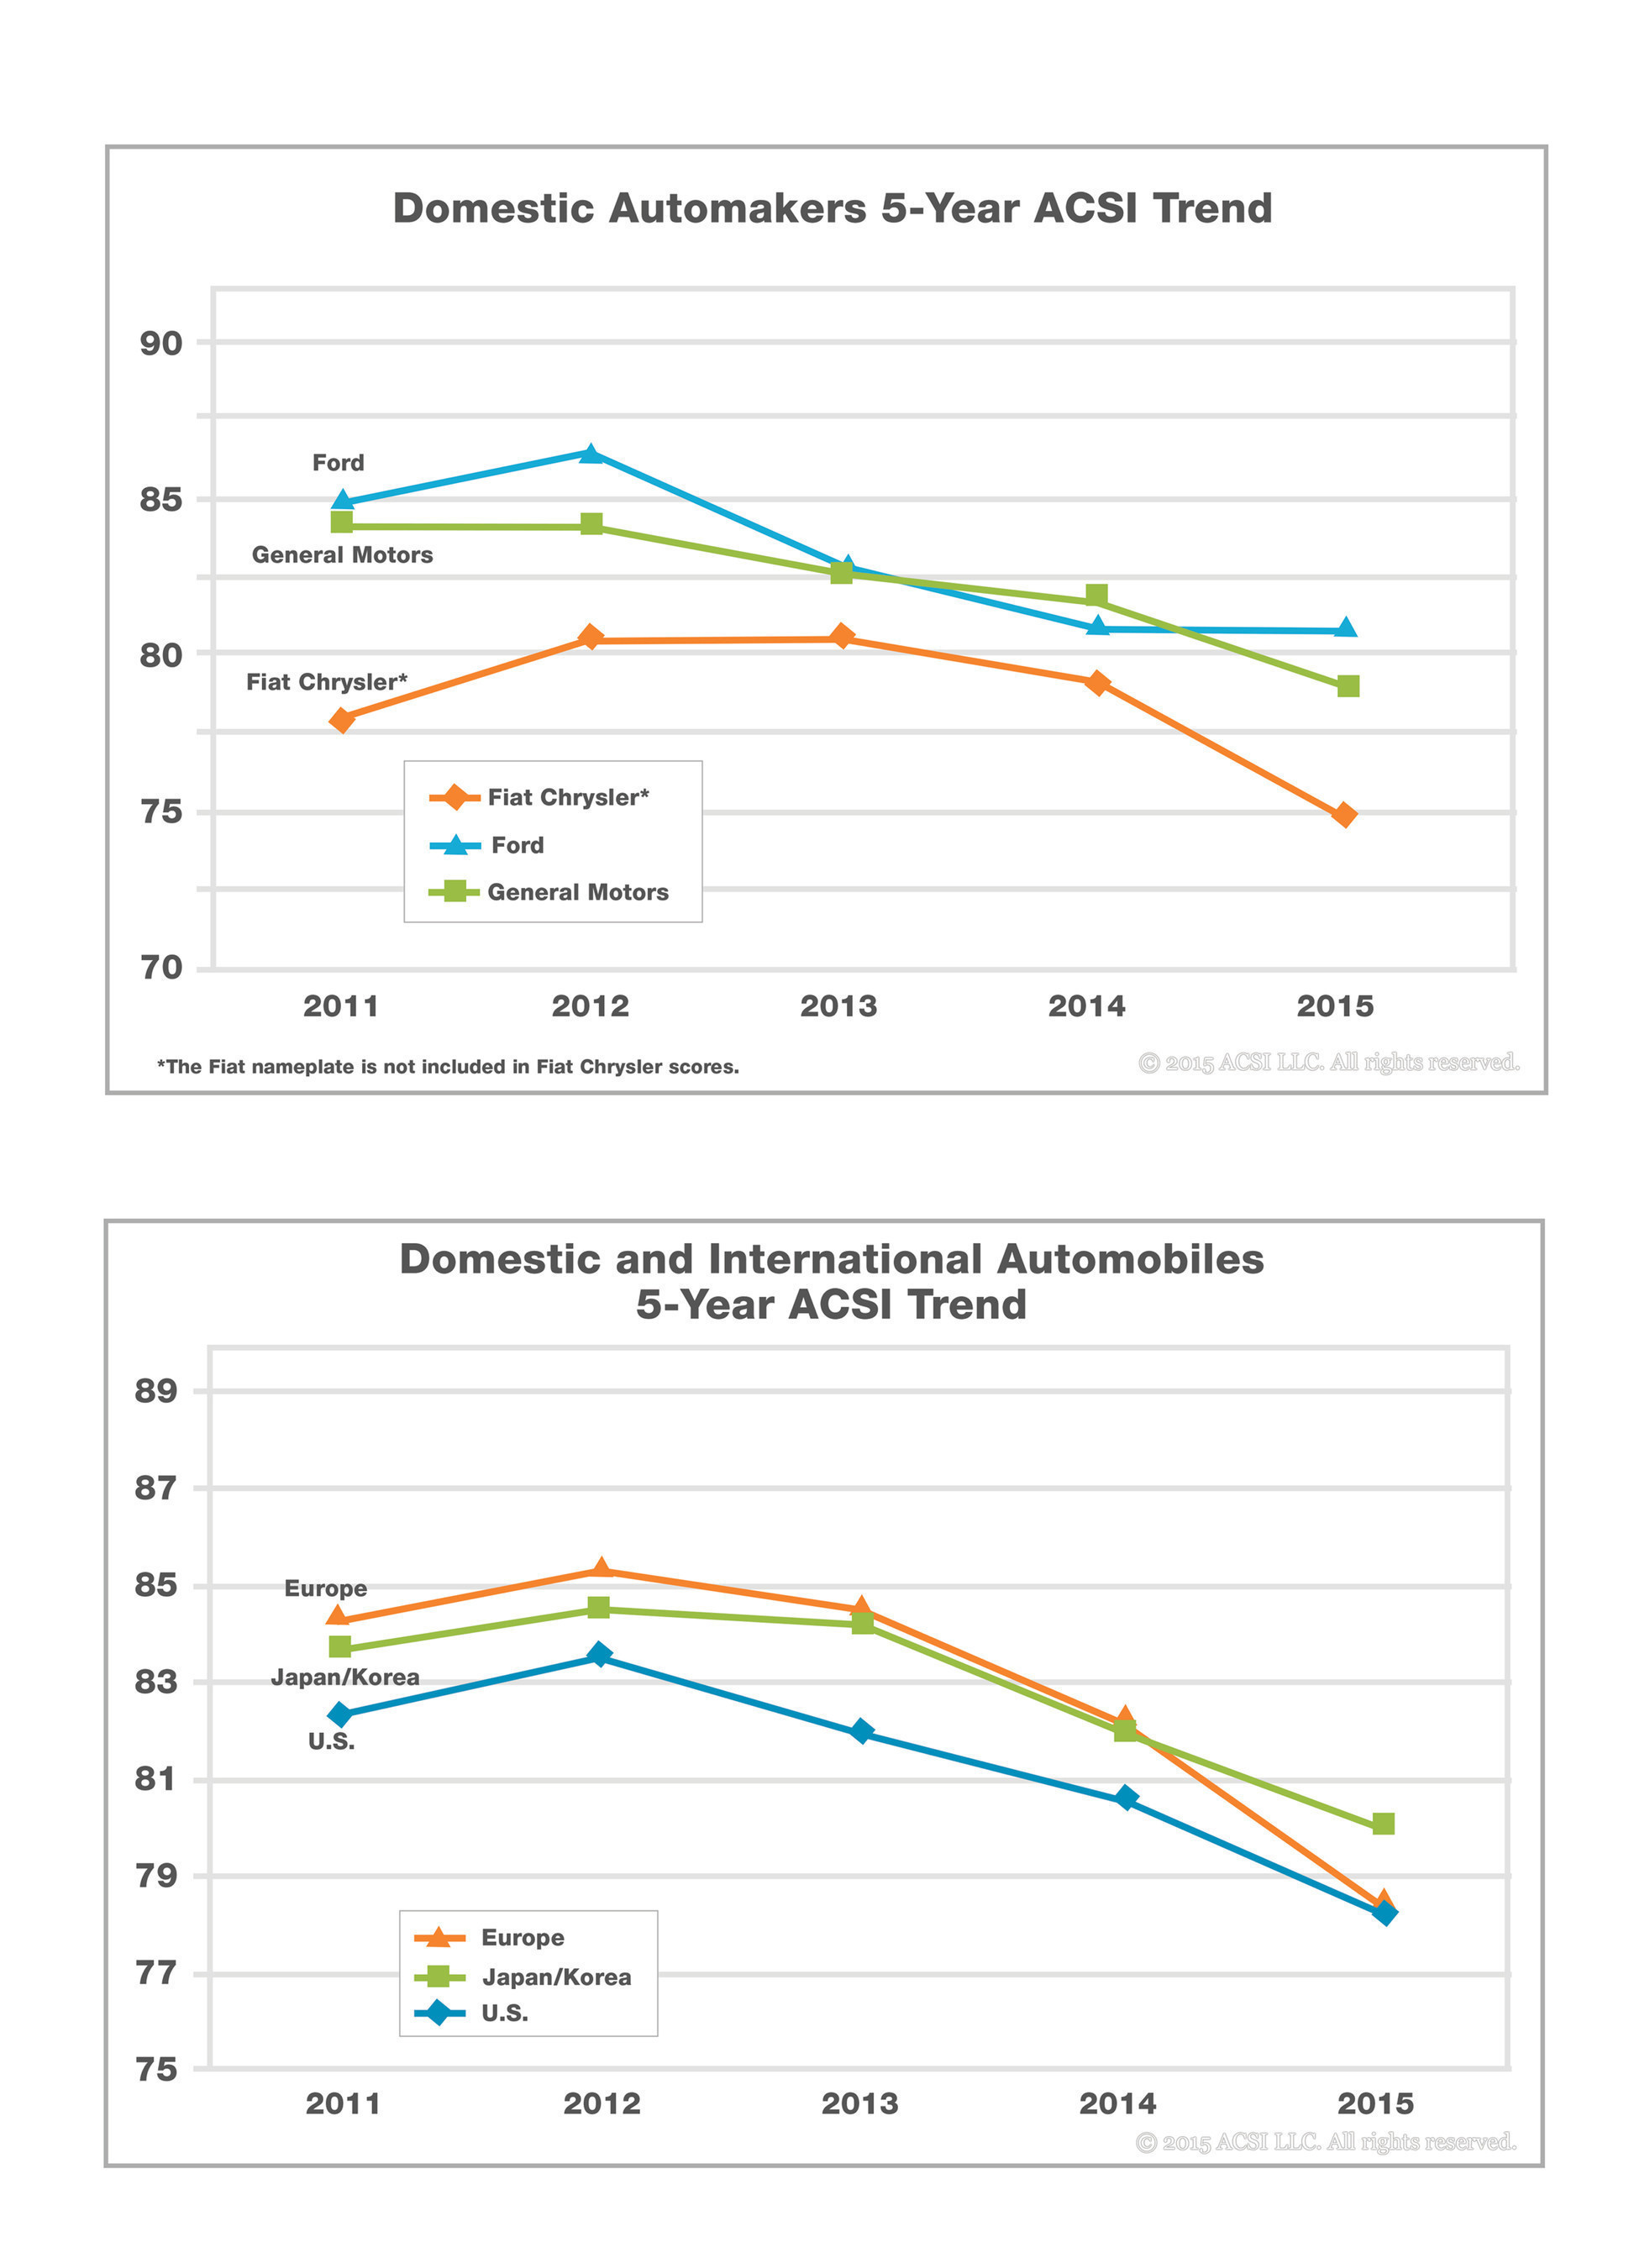 ACSI Auto Industry 5-year Trends